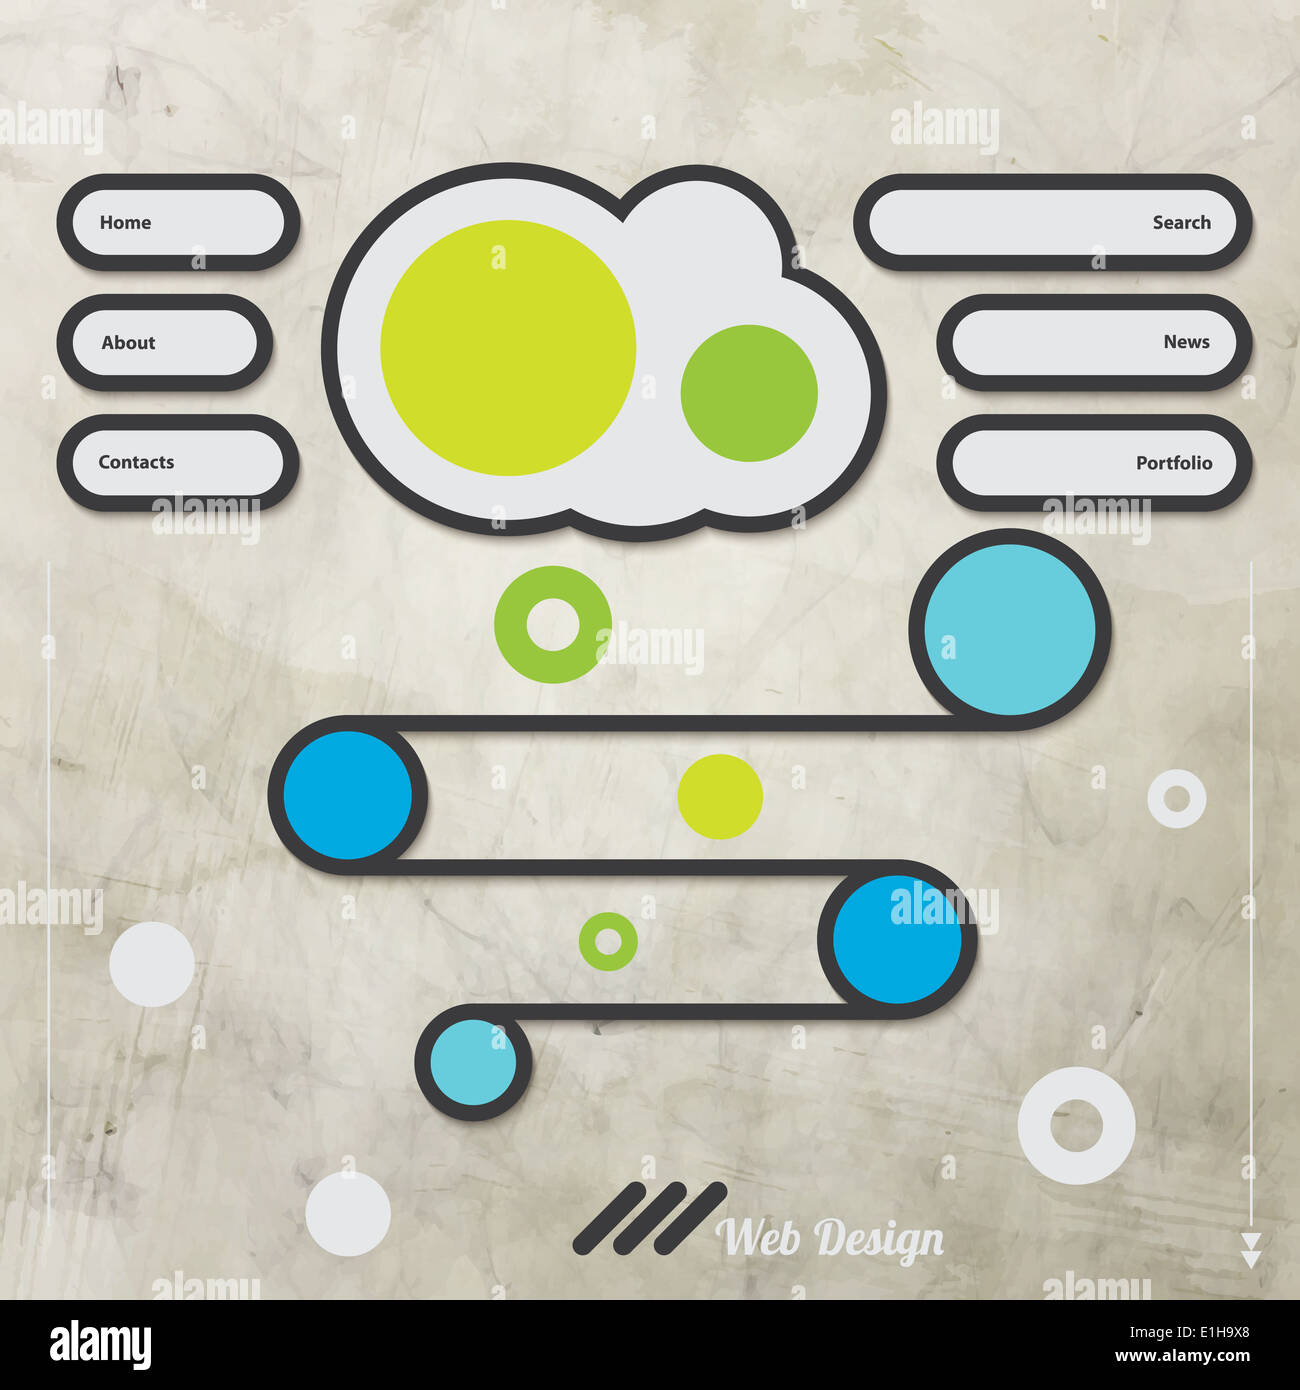 modern web design template with cloud and menu buttons over grunge texture Stock Photo